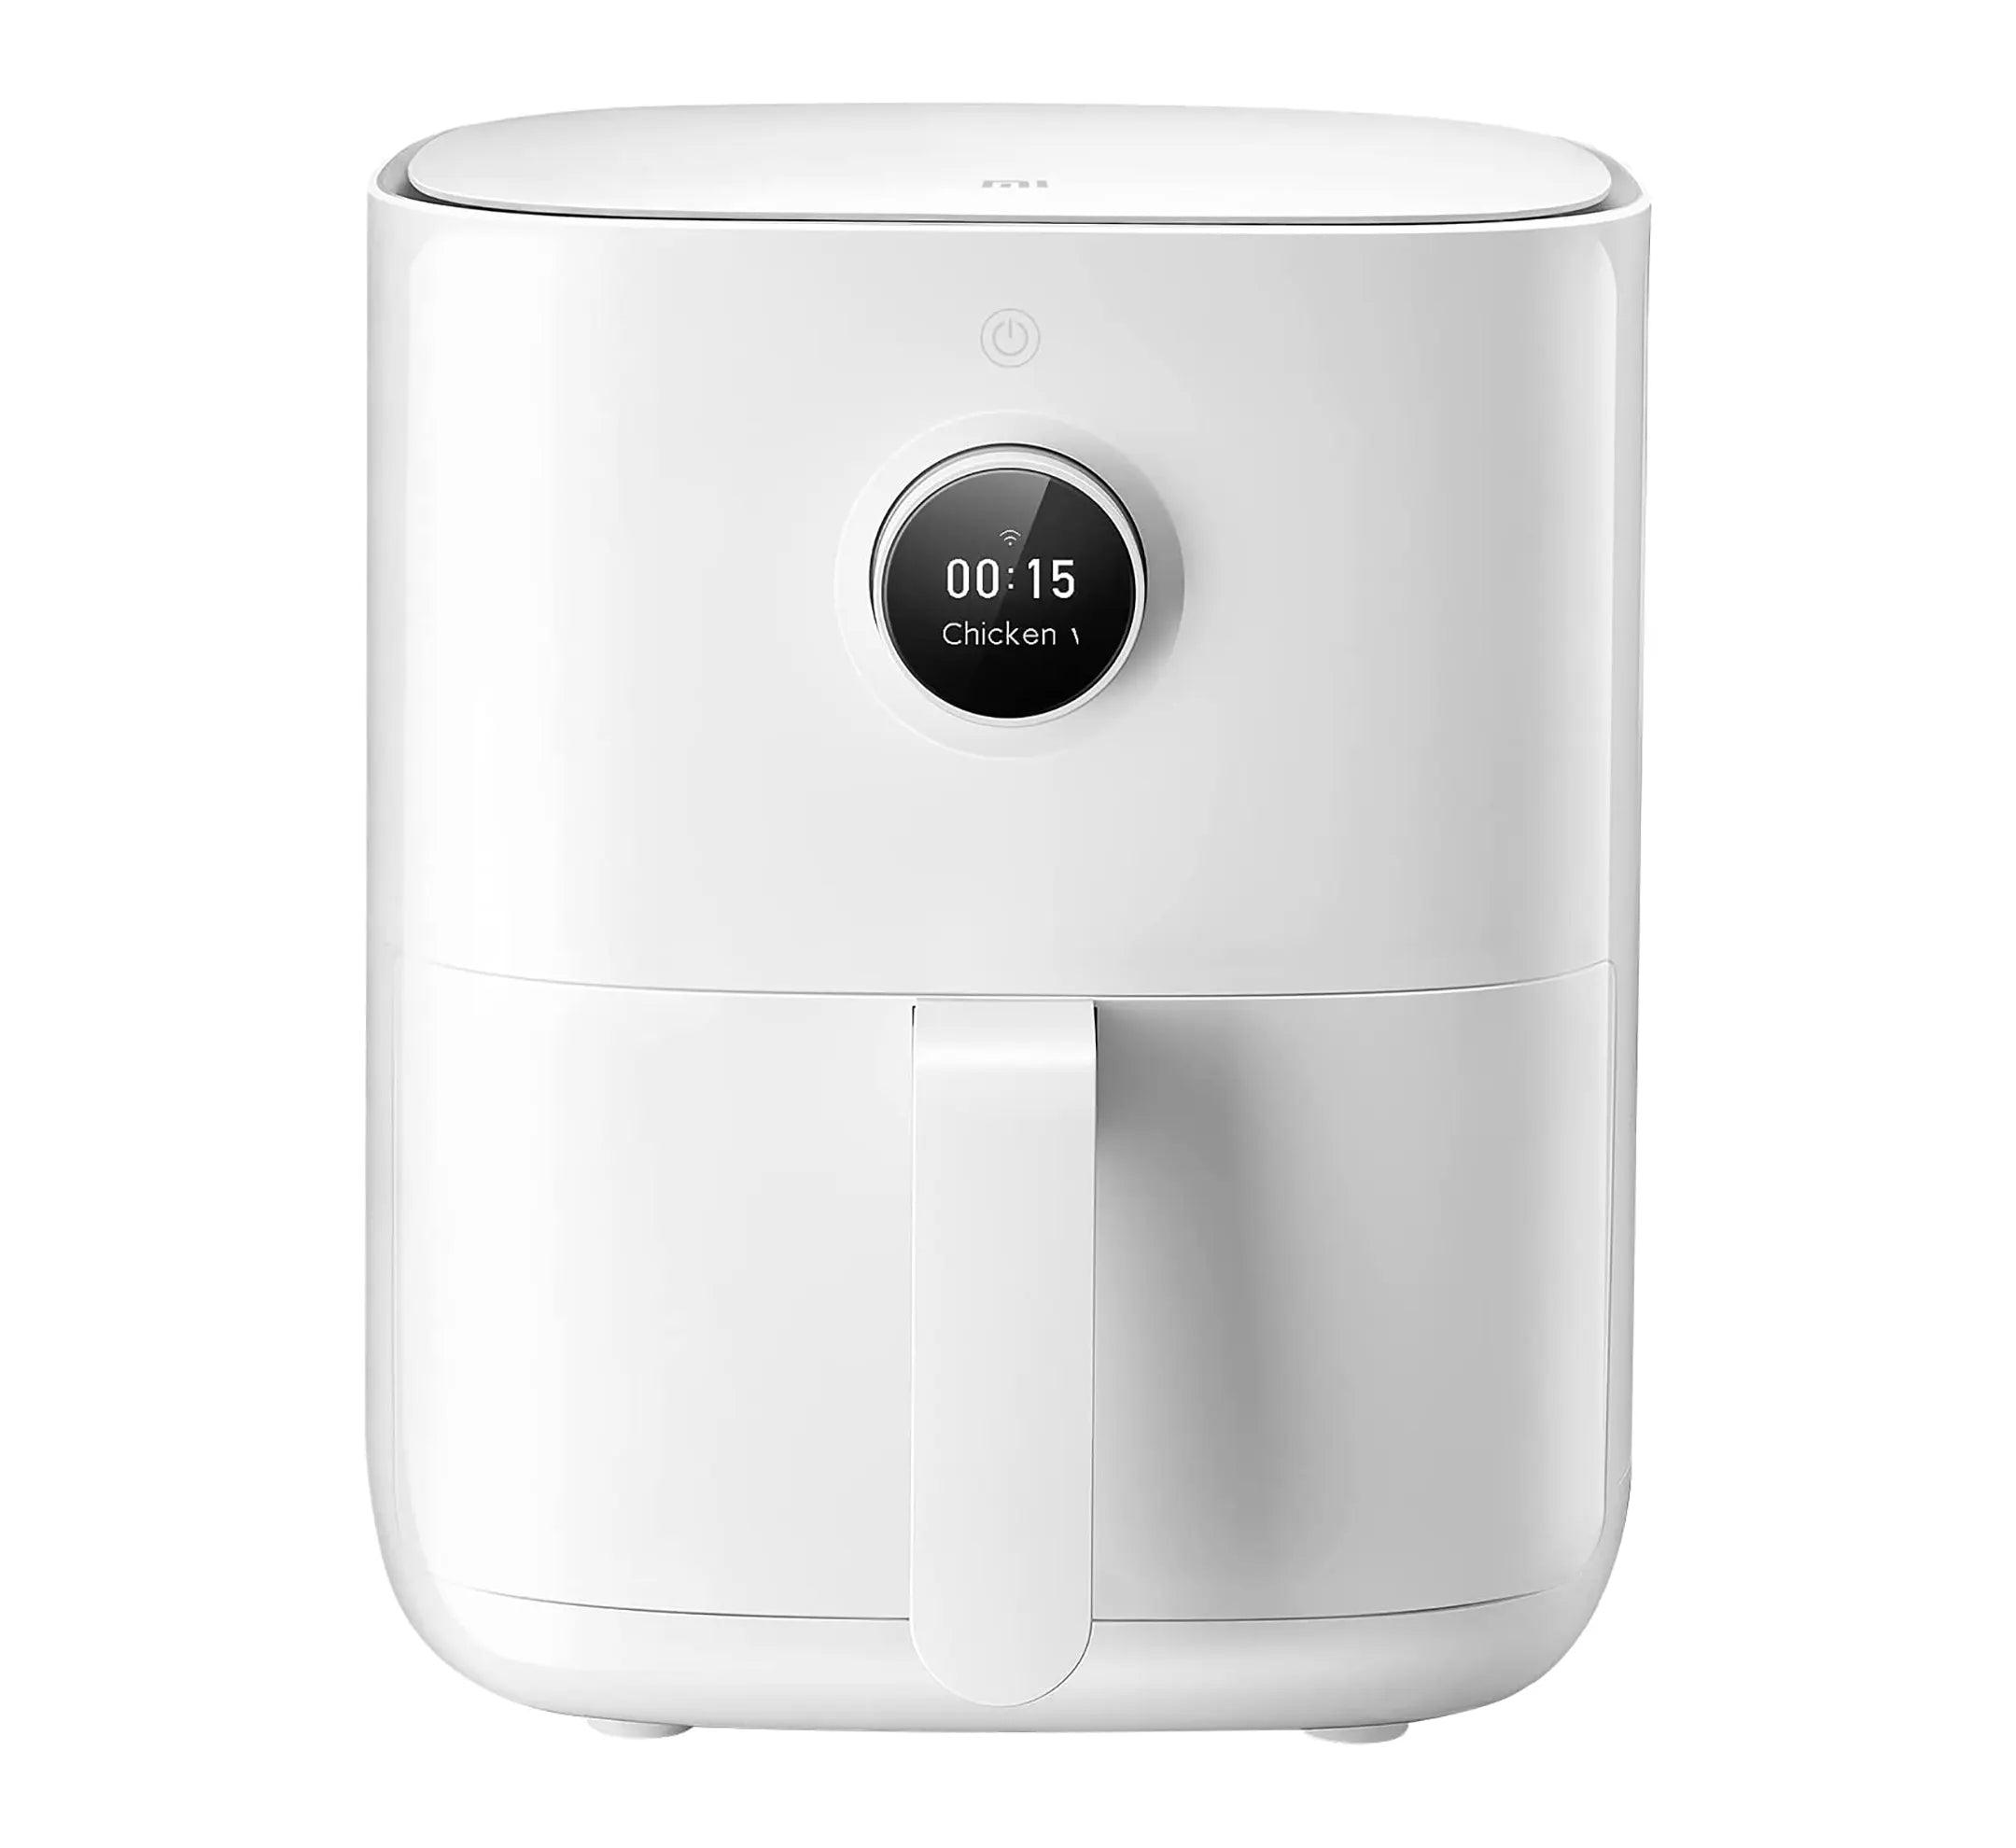 Xiaomi Mi Smart Air Fryer 3.5L Healthier Cooking With Less Oil and Low-fat - Brightex Retail UK